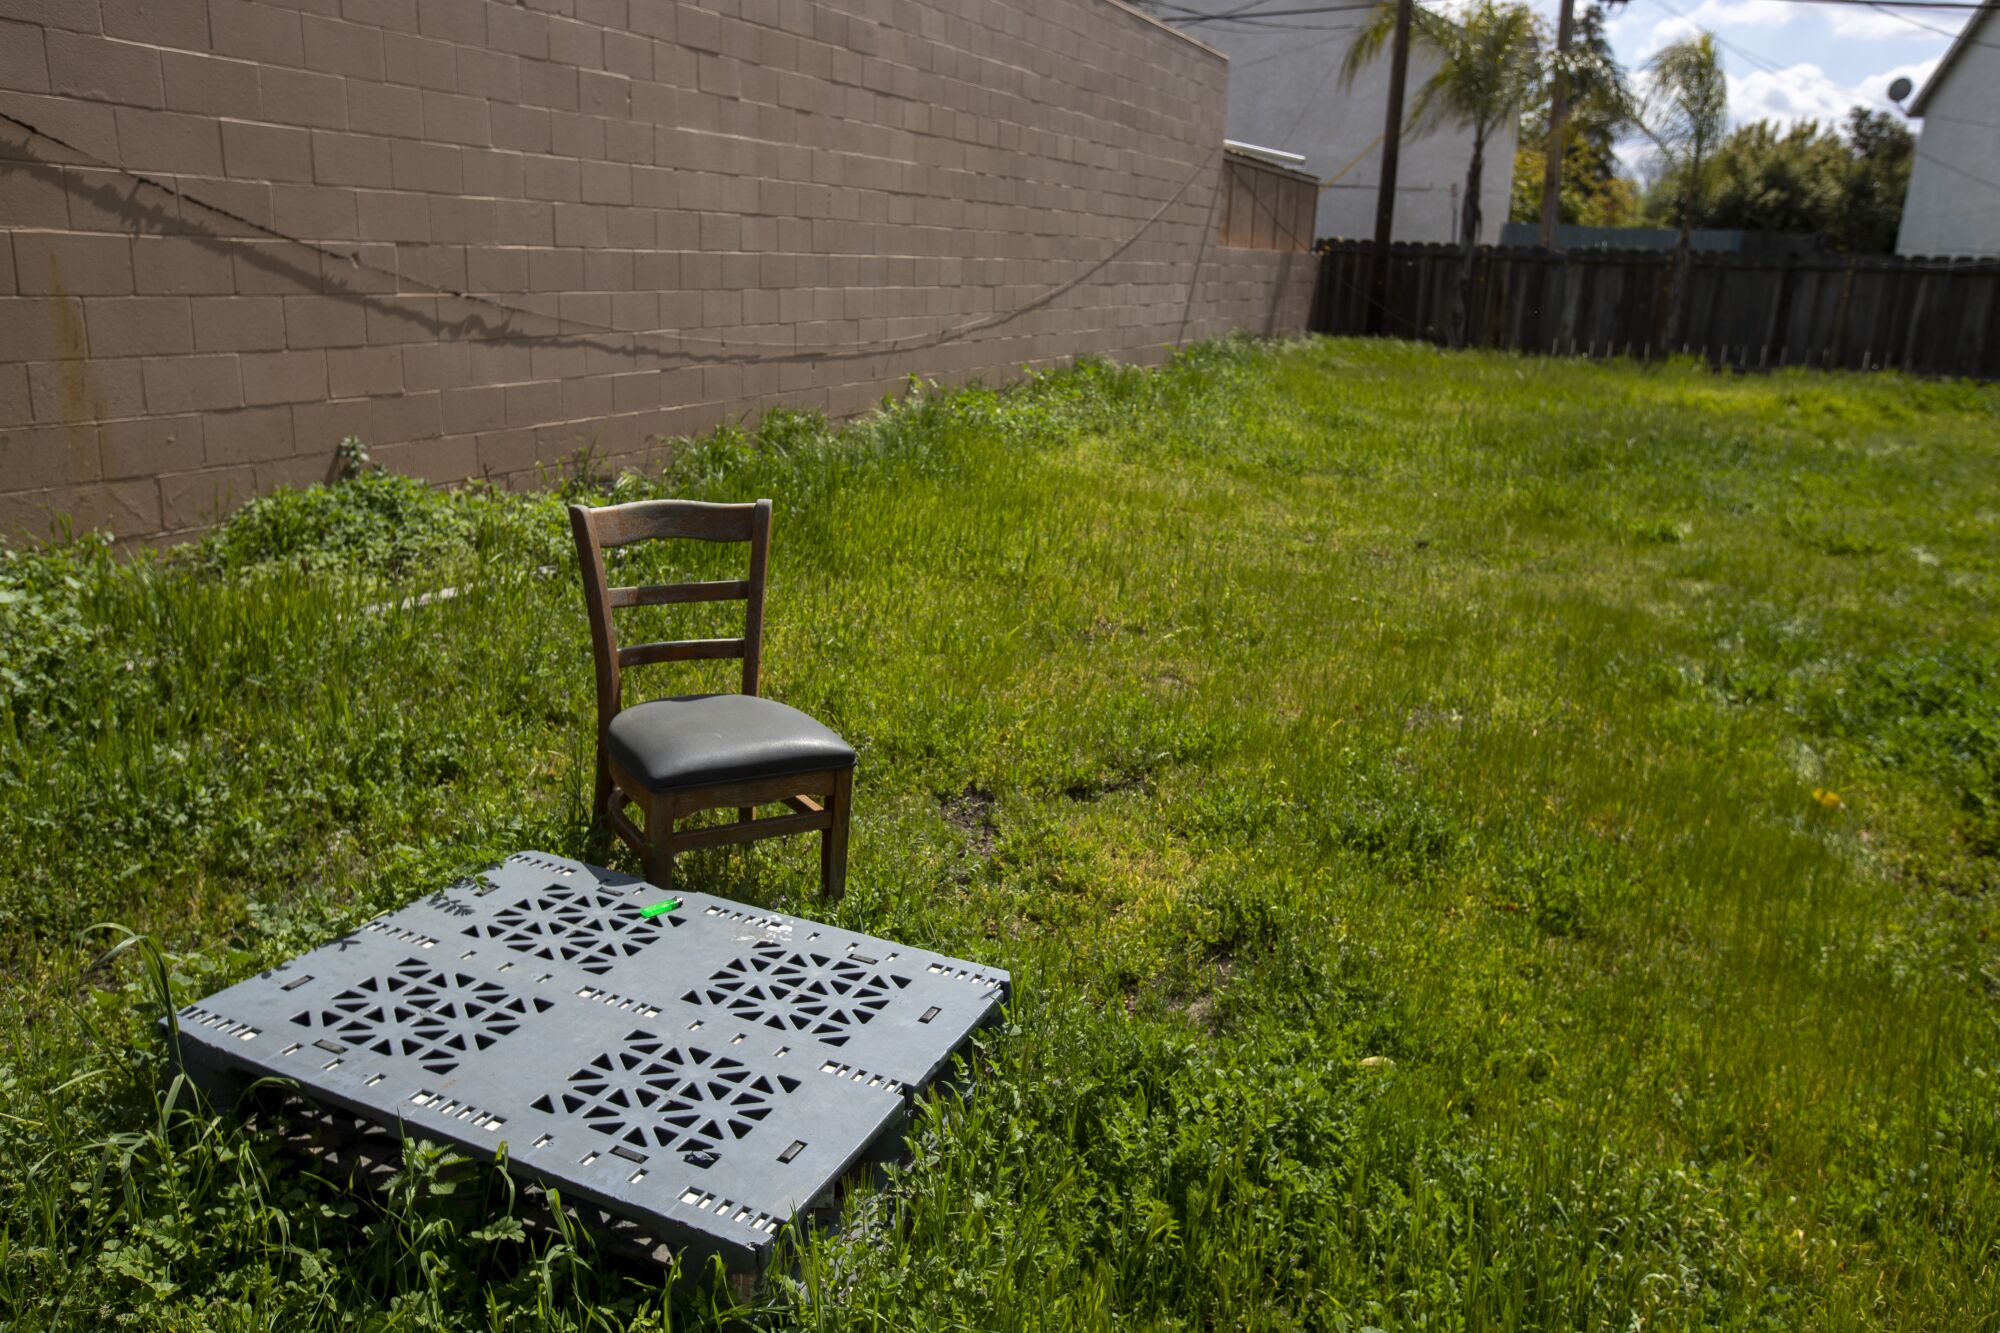 A grassy lot with a square, metal covering and a chair.